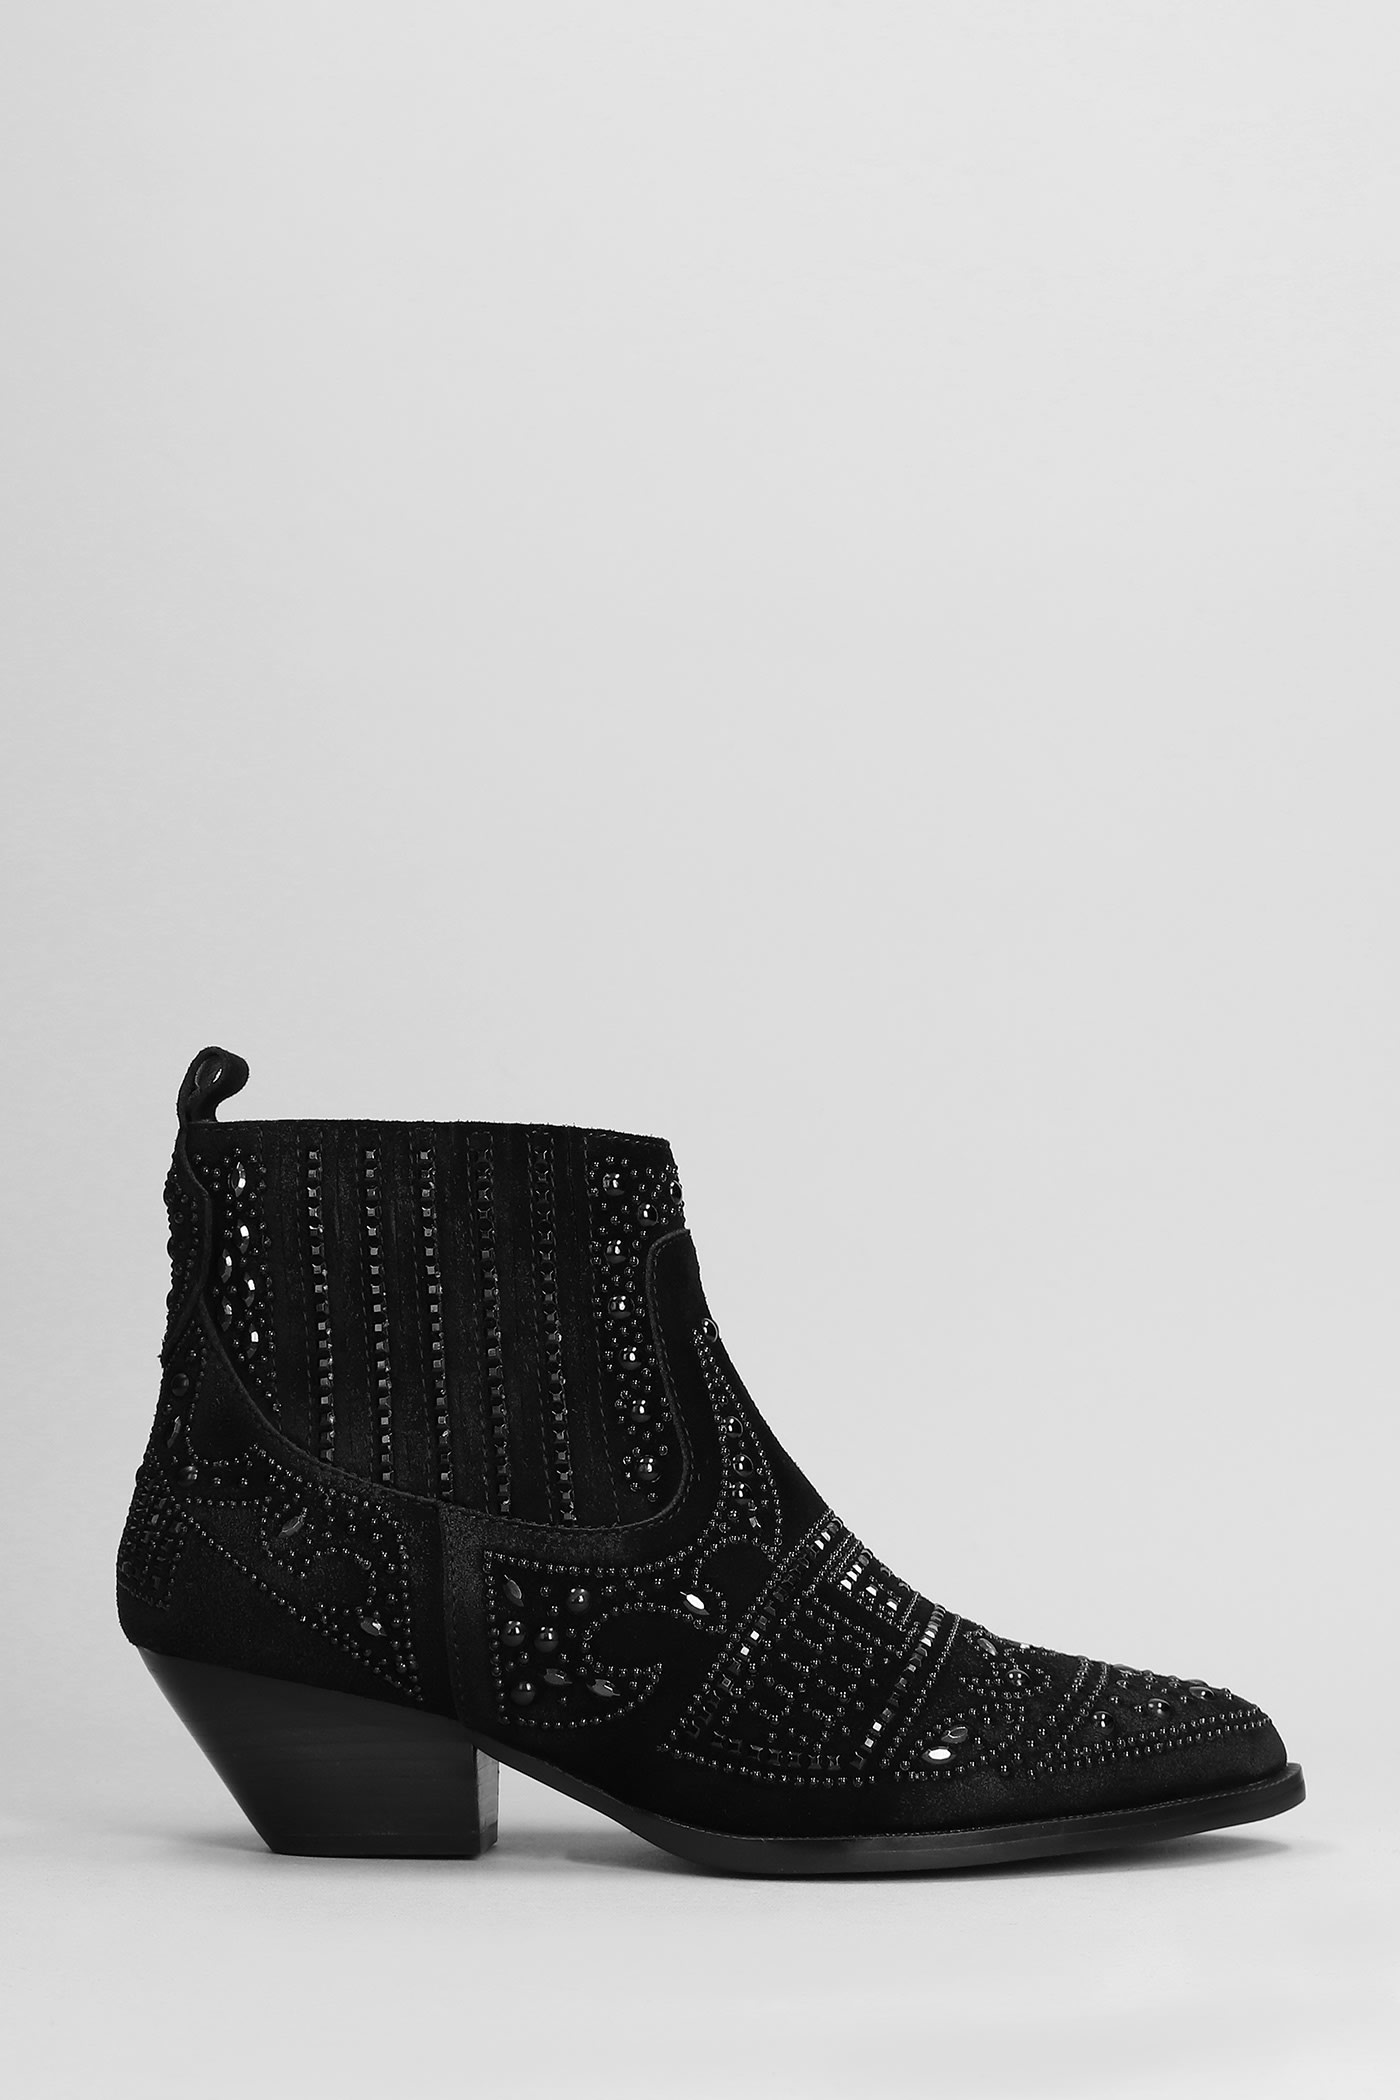 BIBI LOU TEXAN ANKLE BOOTS IN BLACK SUEDE